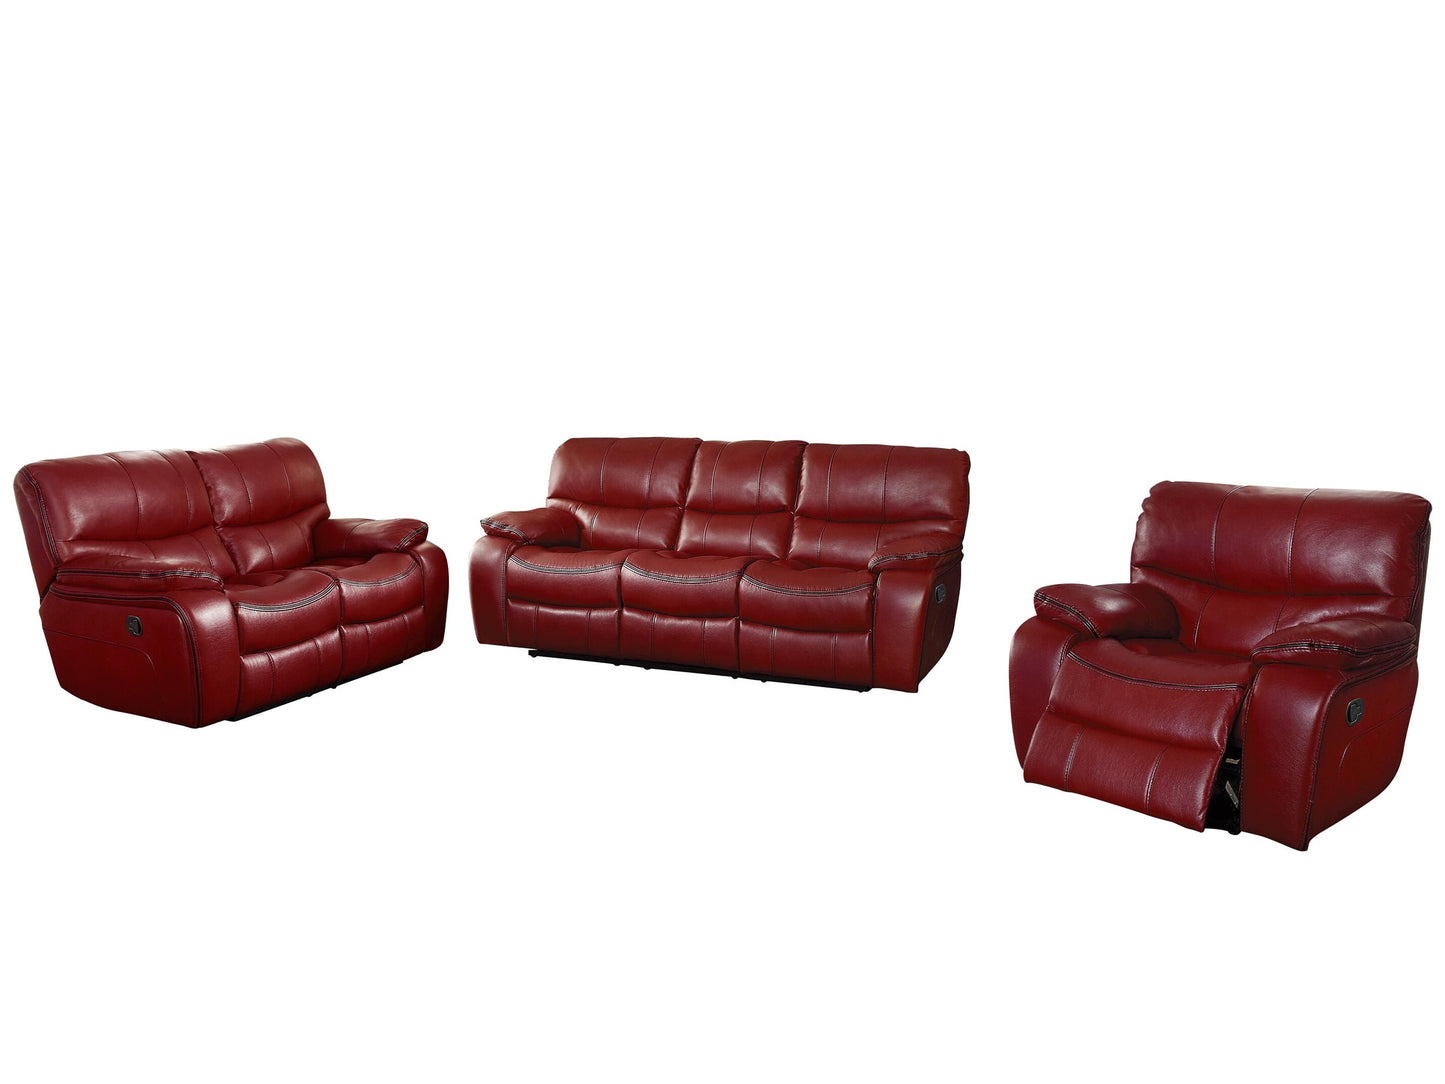 Homelegance Pecos 4PC Sectional Reclining Console Love Seat, Corner, Recliner Chair & Reclining Love Seat in Red Leather